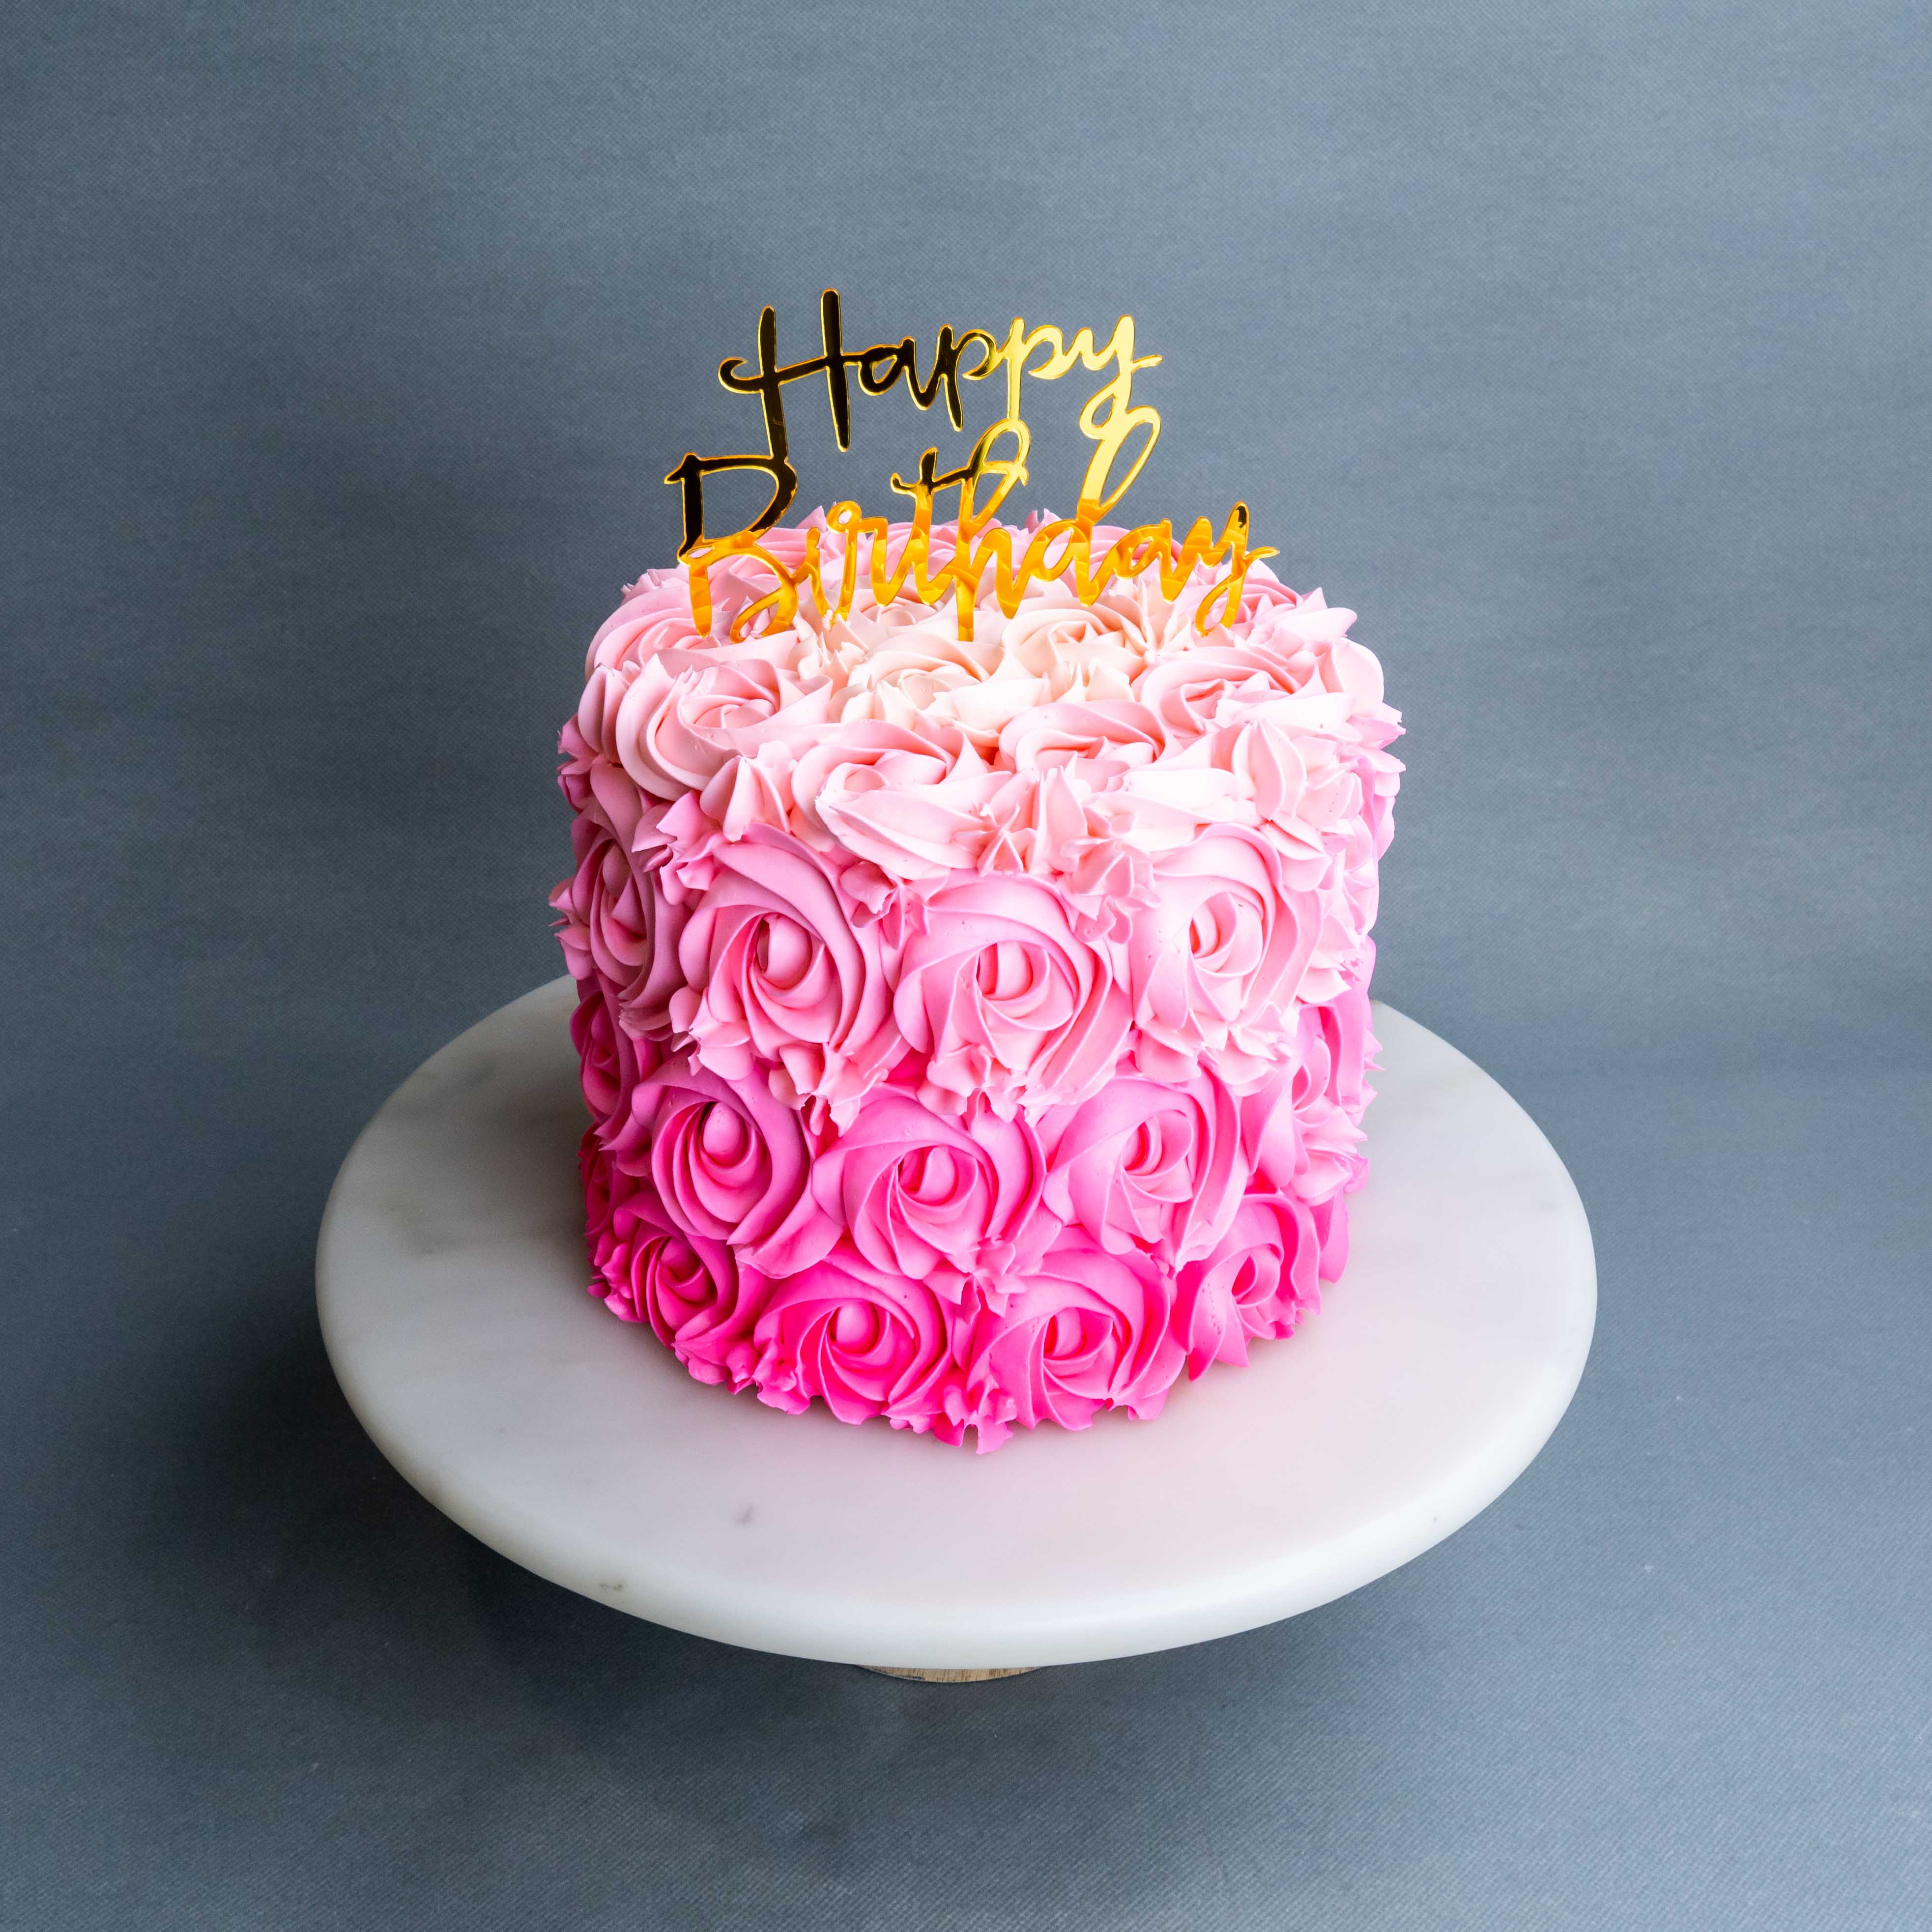 Send Photo Cakes to India | Order Customized Cakes Online | Pretty Petals